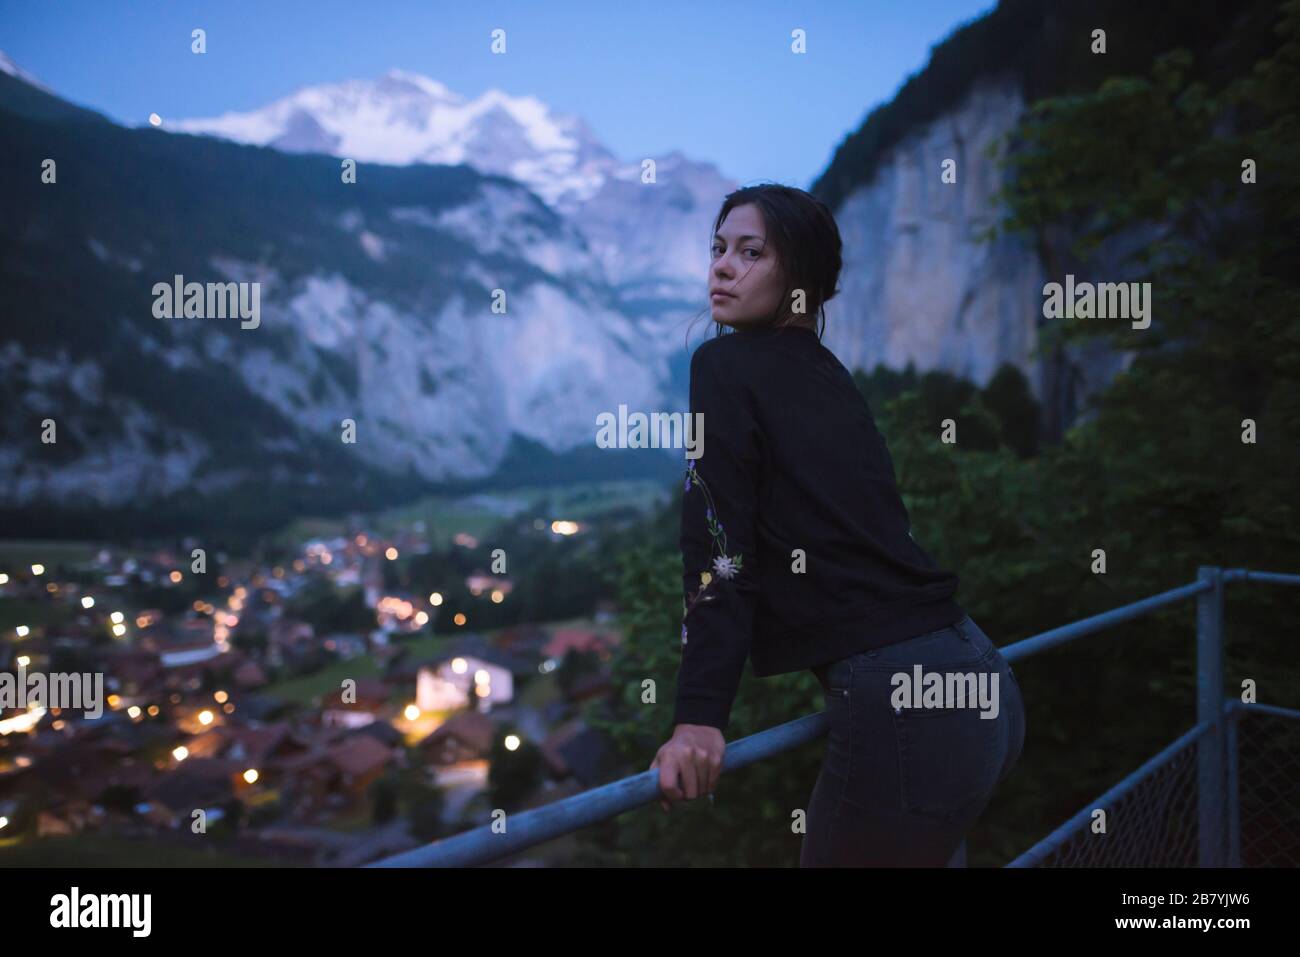 Young woman leaning on railing by mountain and village Stock Photo